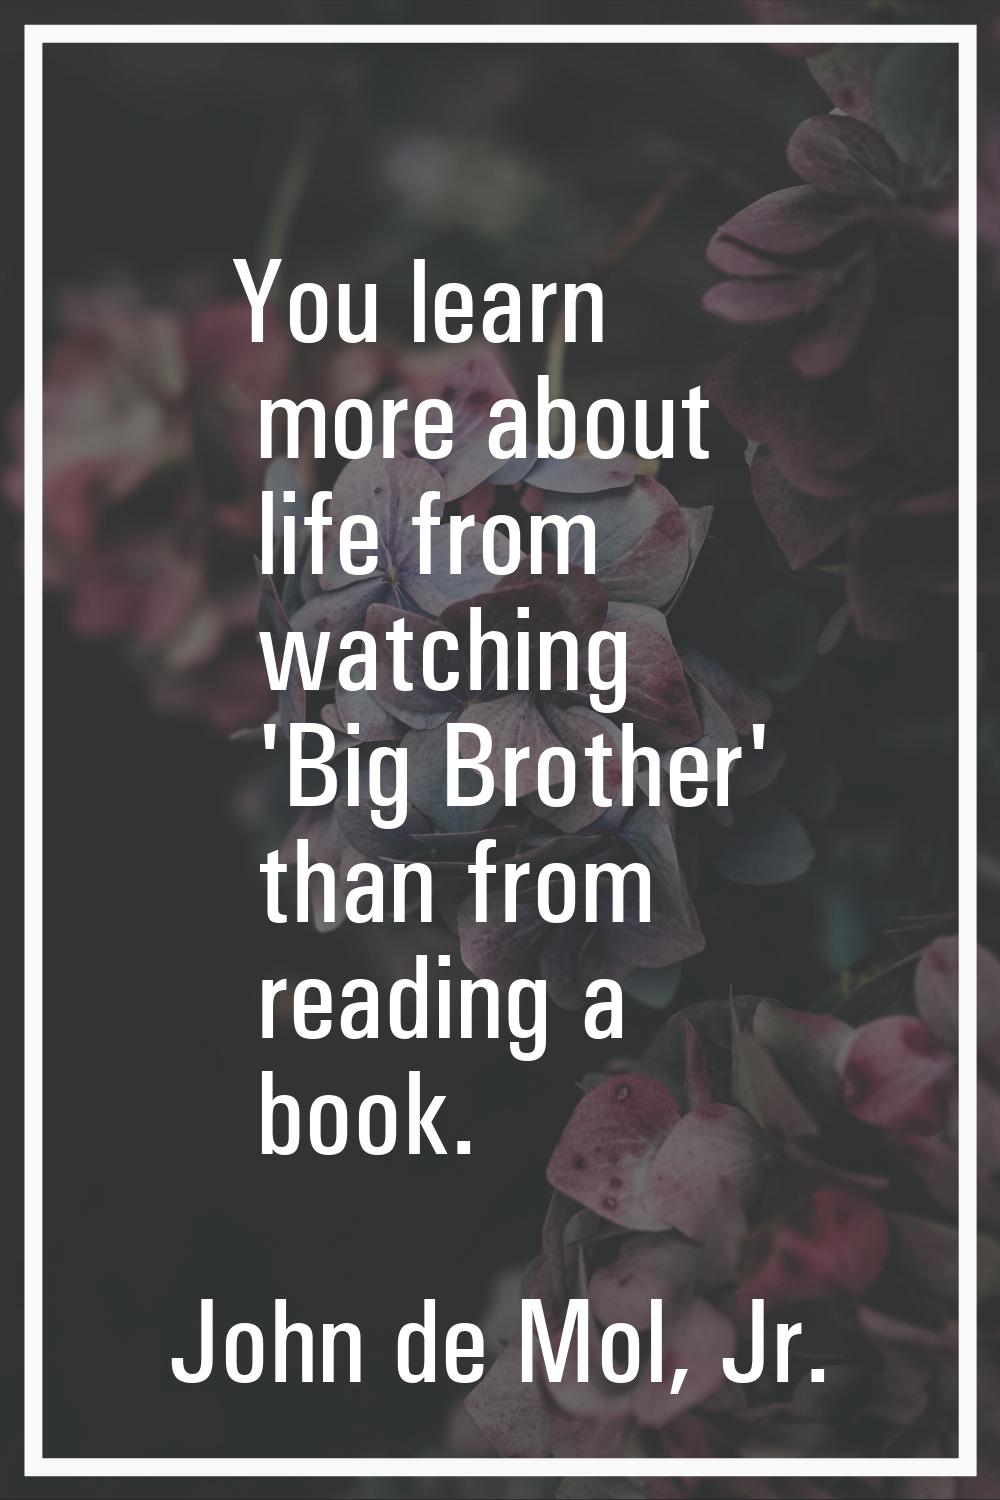 You learn more about life from watching 'Big Brother' than from reading a book.